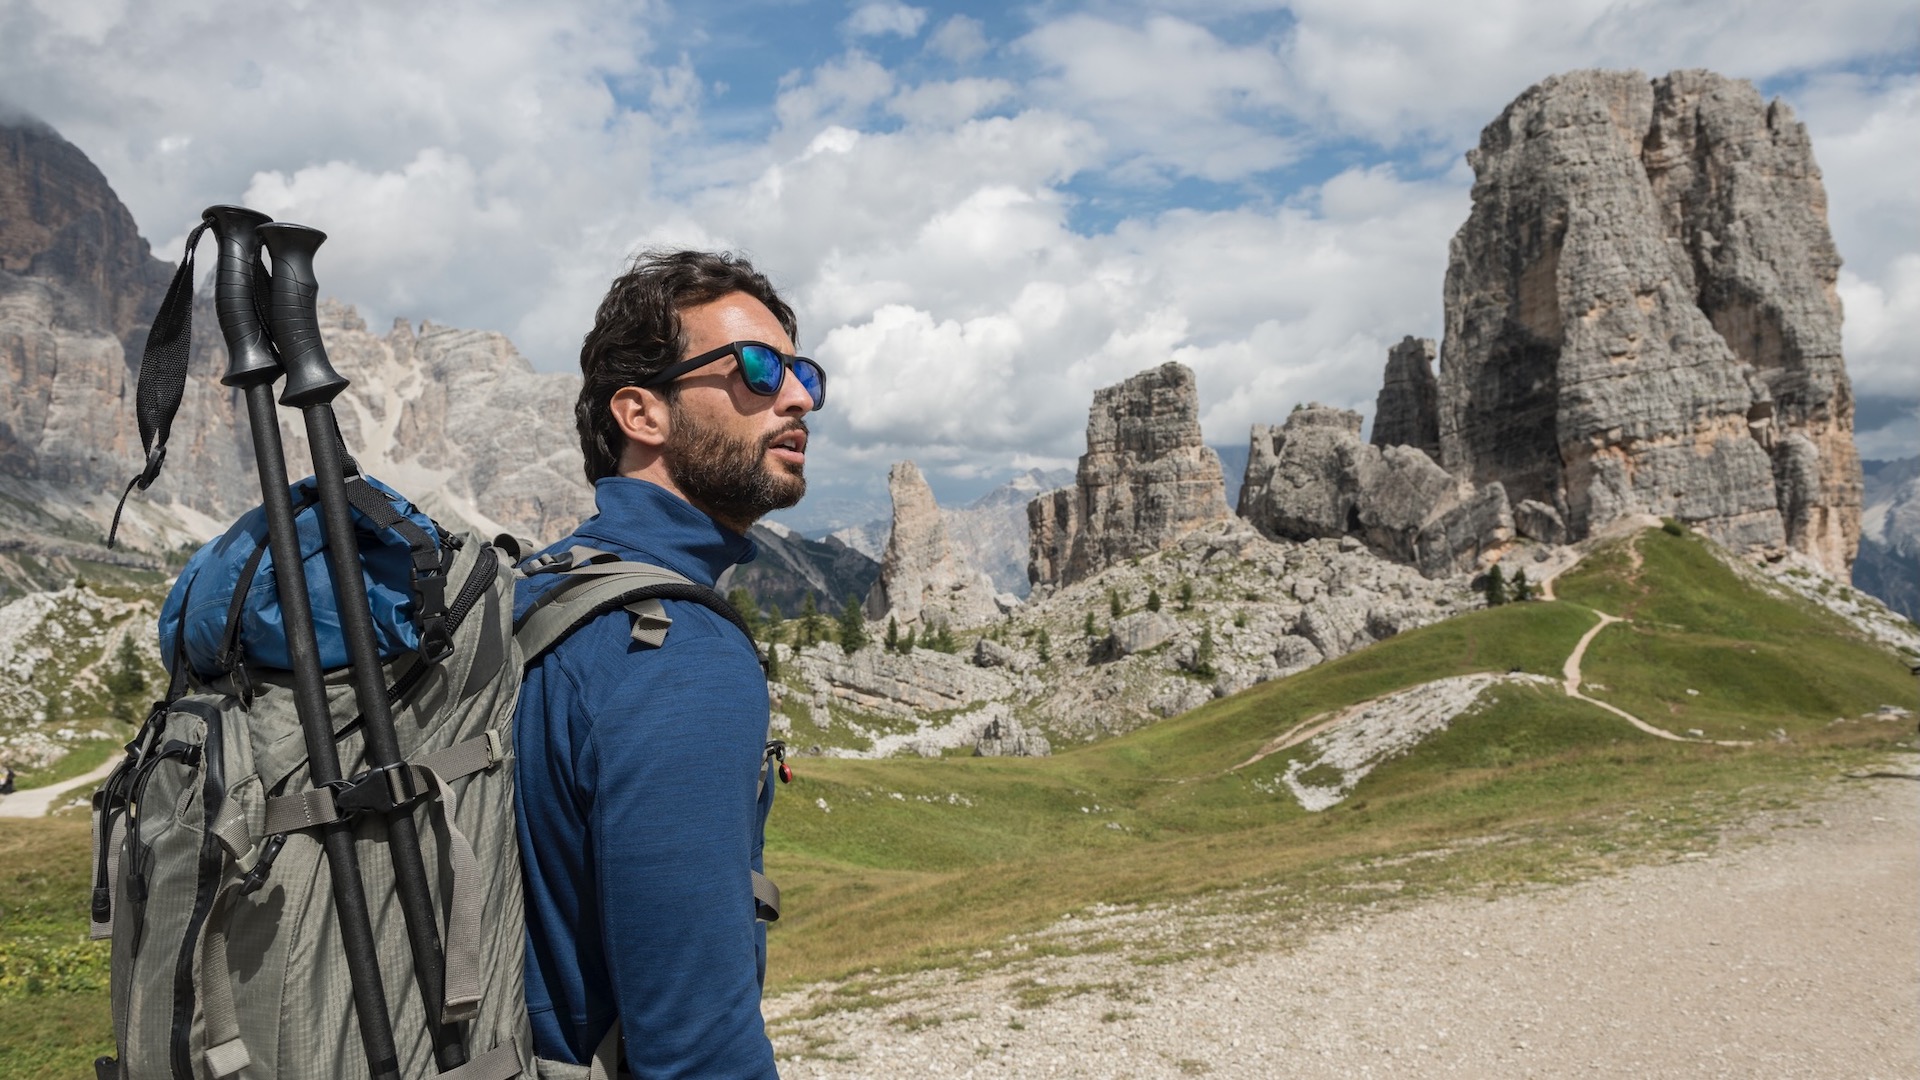 Sunglasses for hiking – why you need to protect your eyes